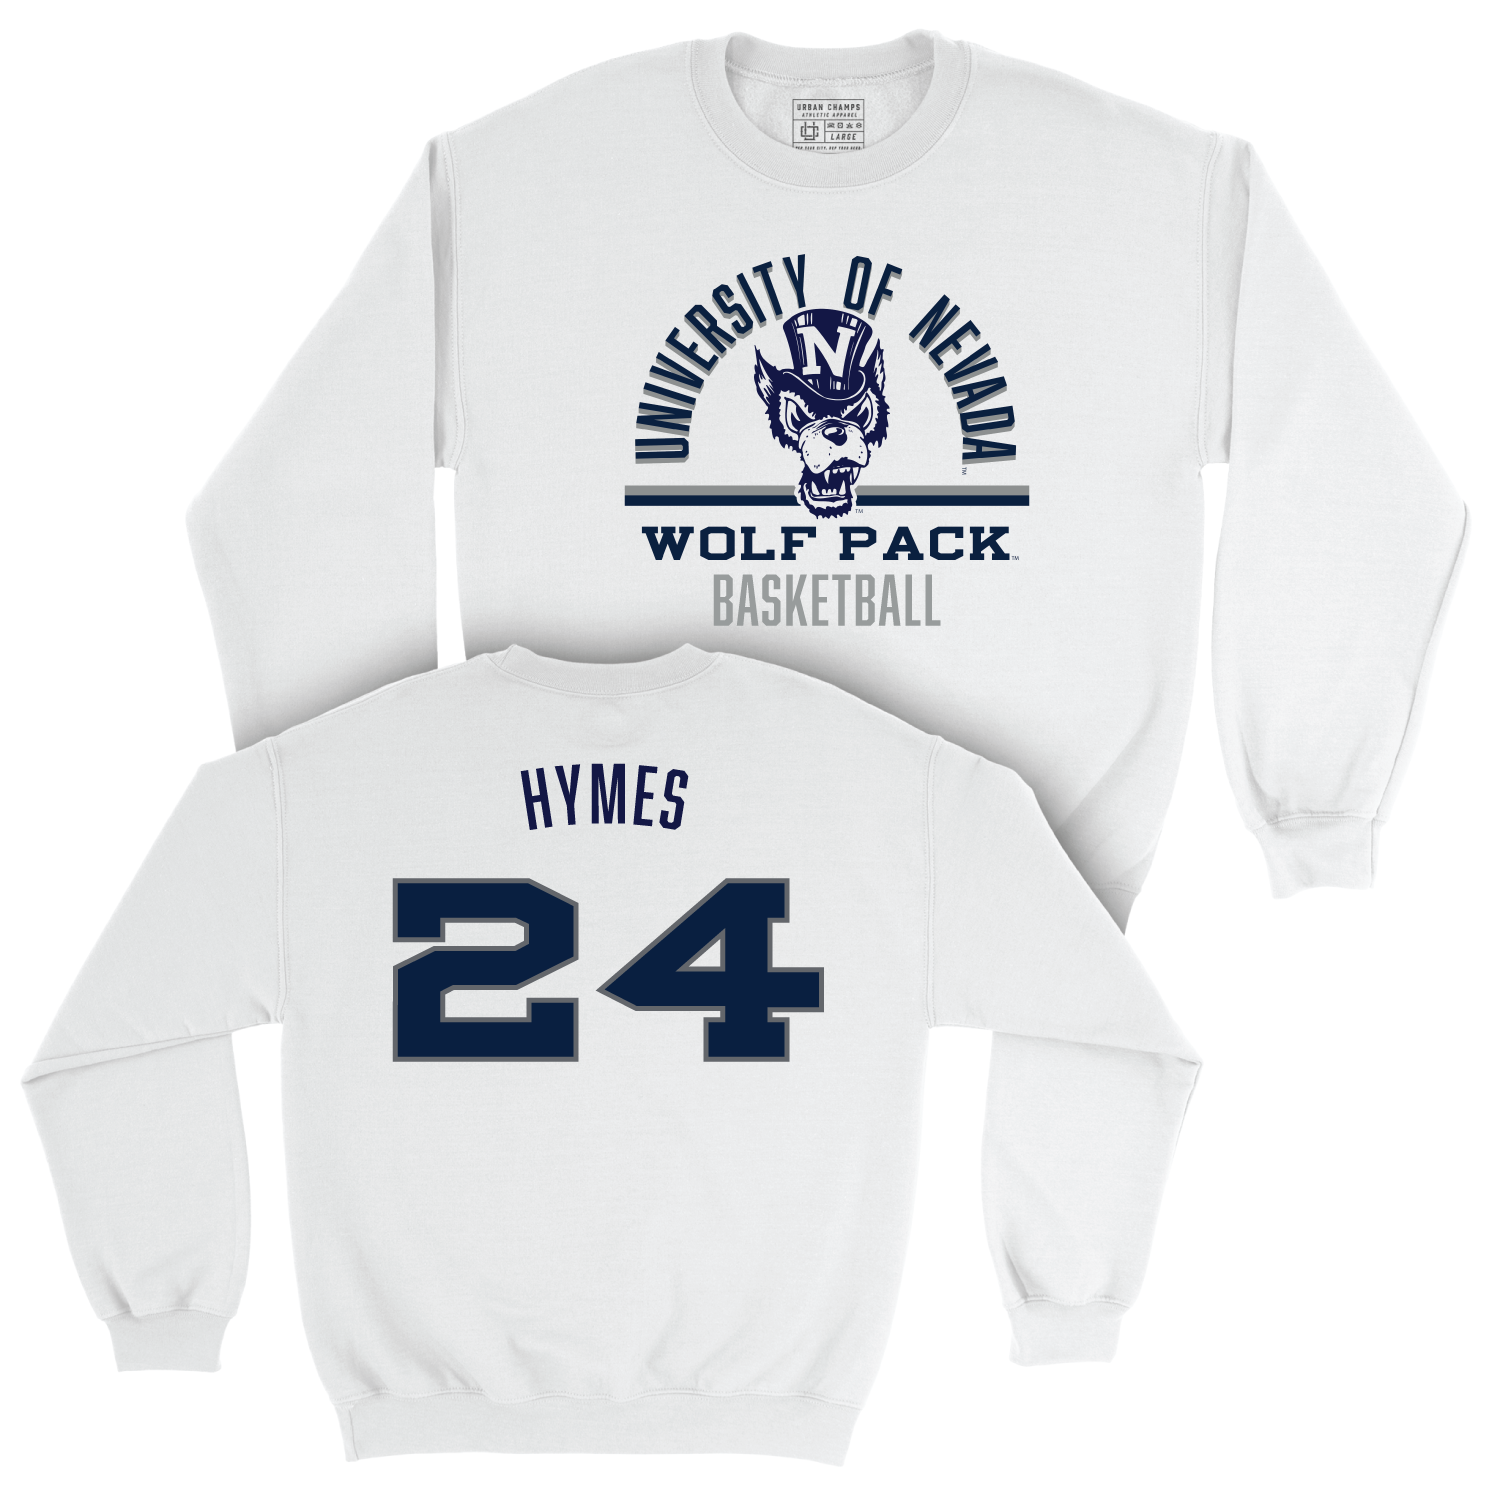 Nevada Men's Basketball White Classic Crew - Isaac Hymes Youth Small